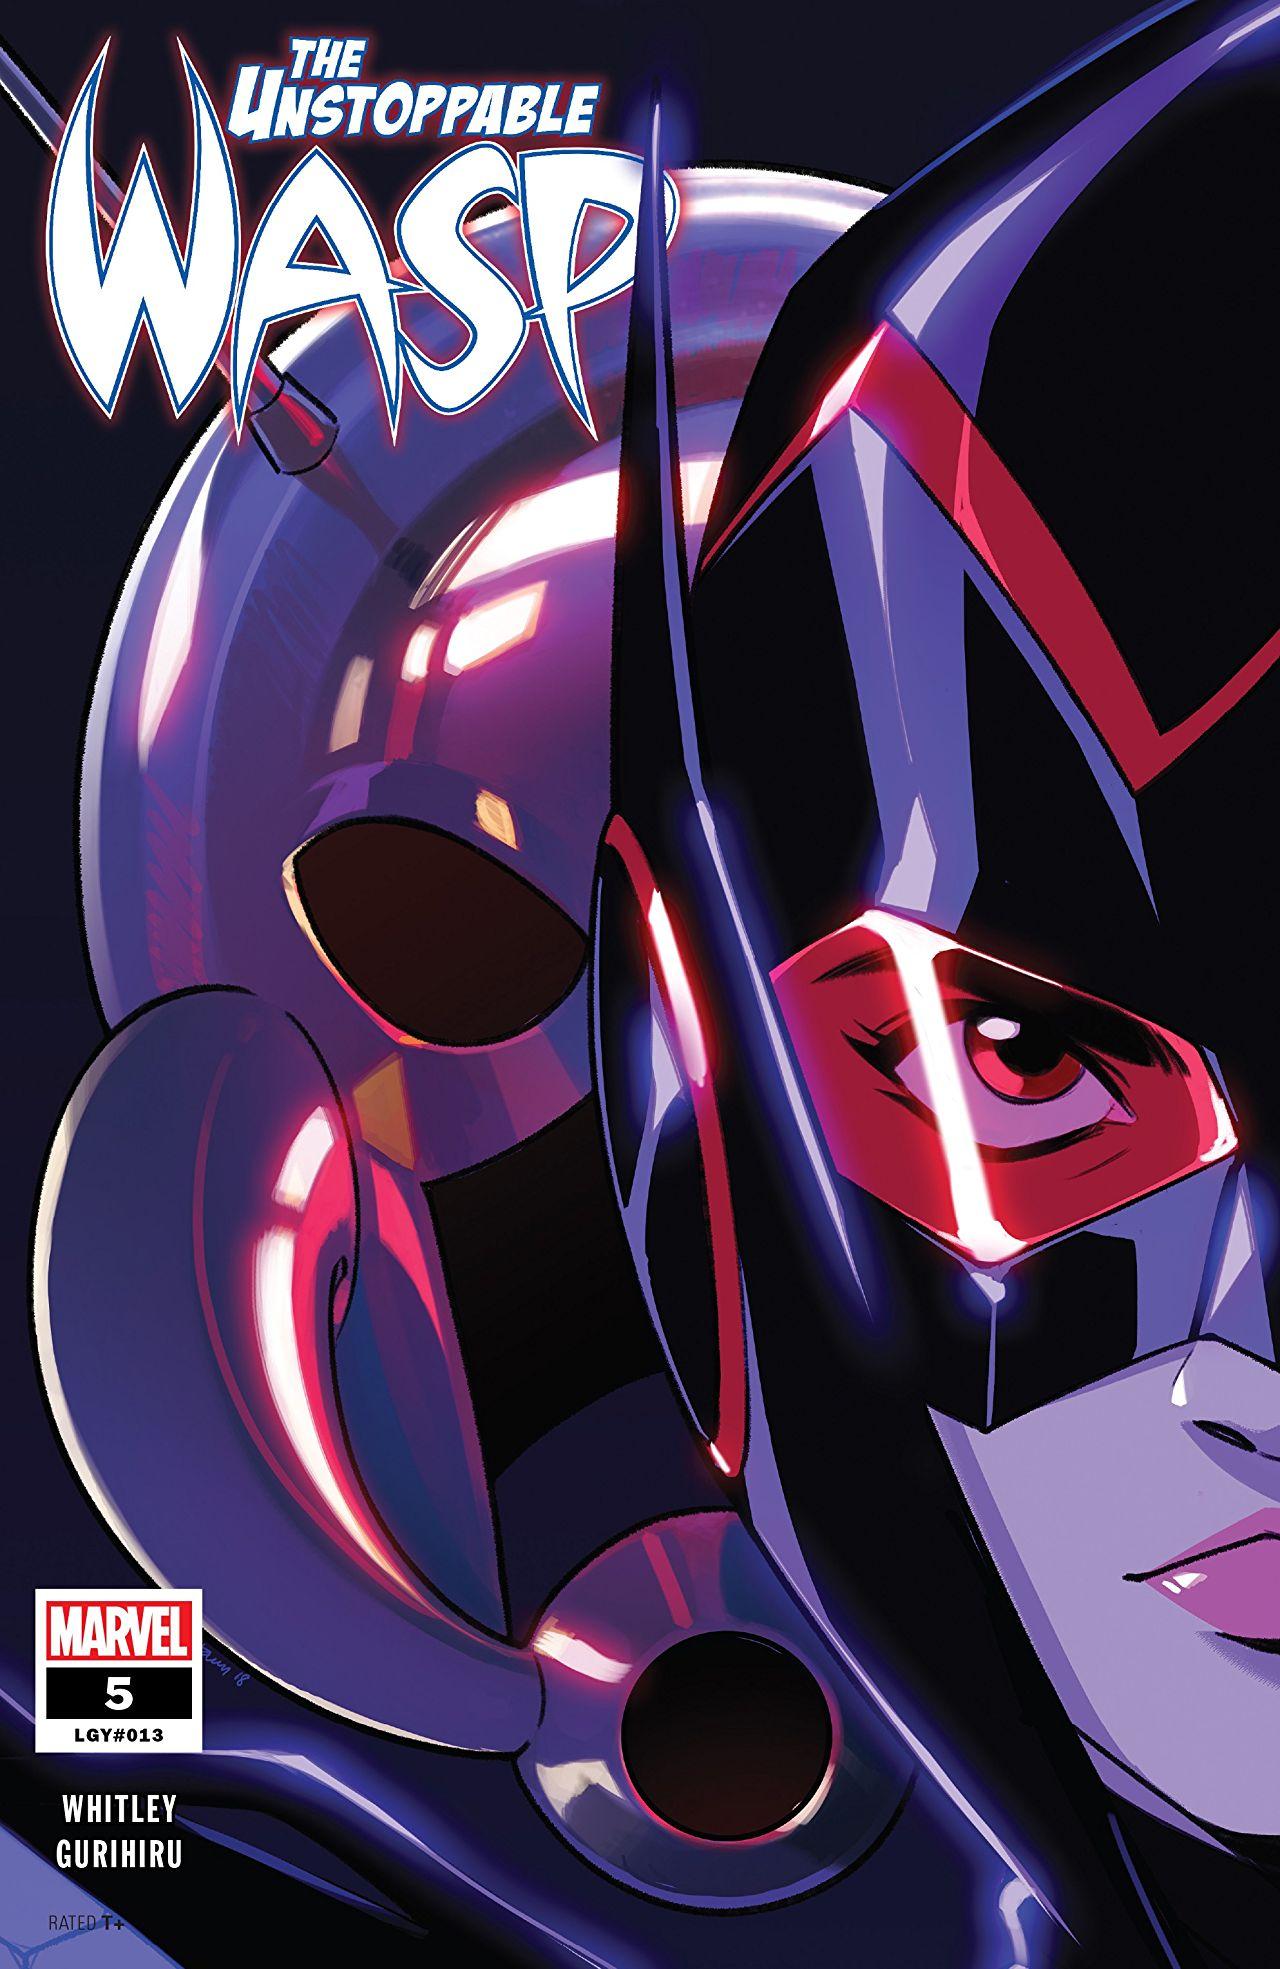 Unstoppable Wasp Vol. 2 #5